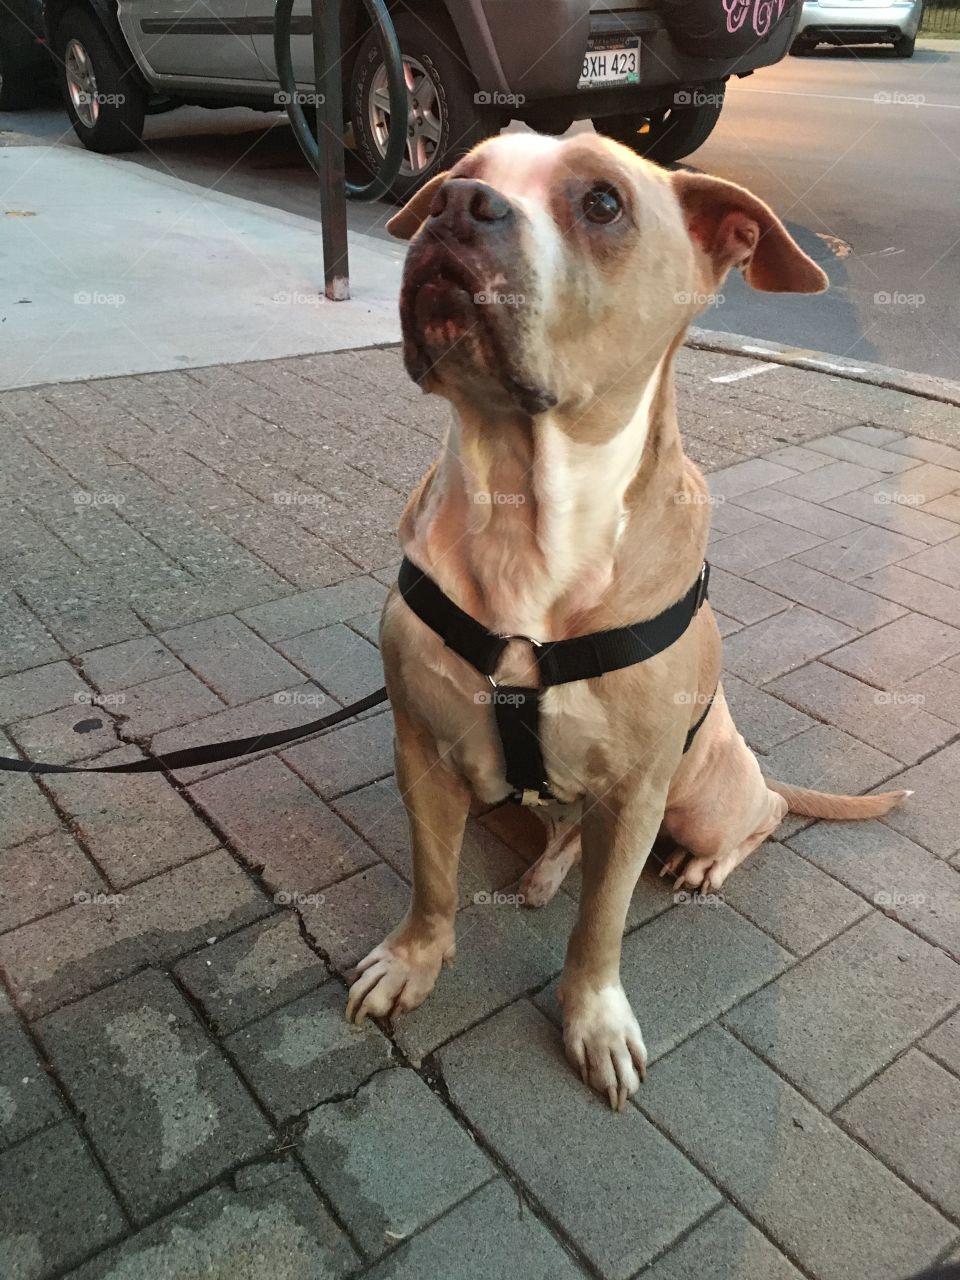 Pit bull enjoying evening out on the town... downtown Lexington Kentucky.... sitting and waiting patiently for a snack